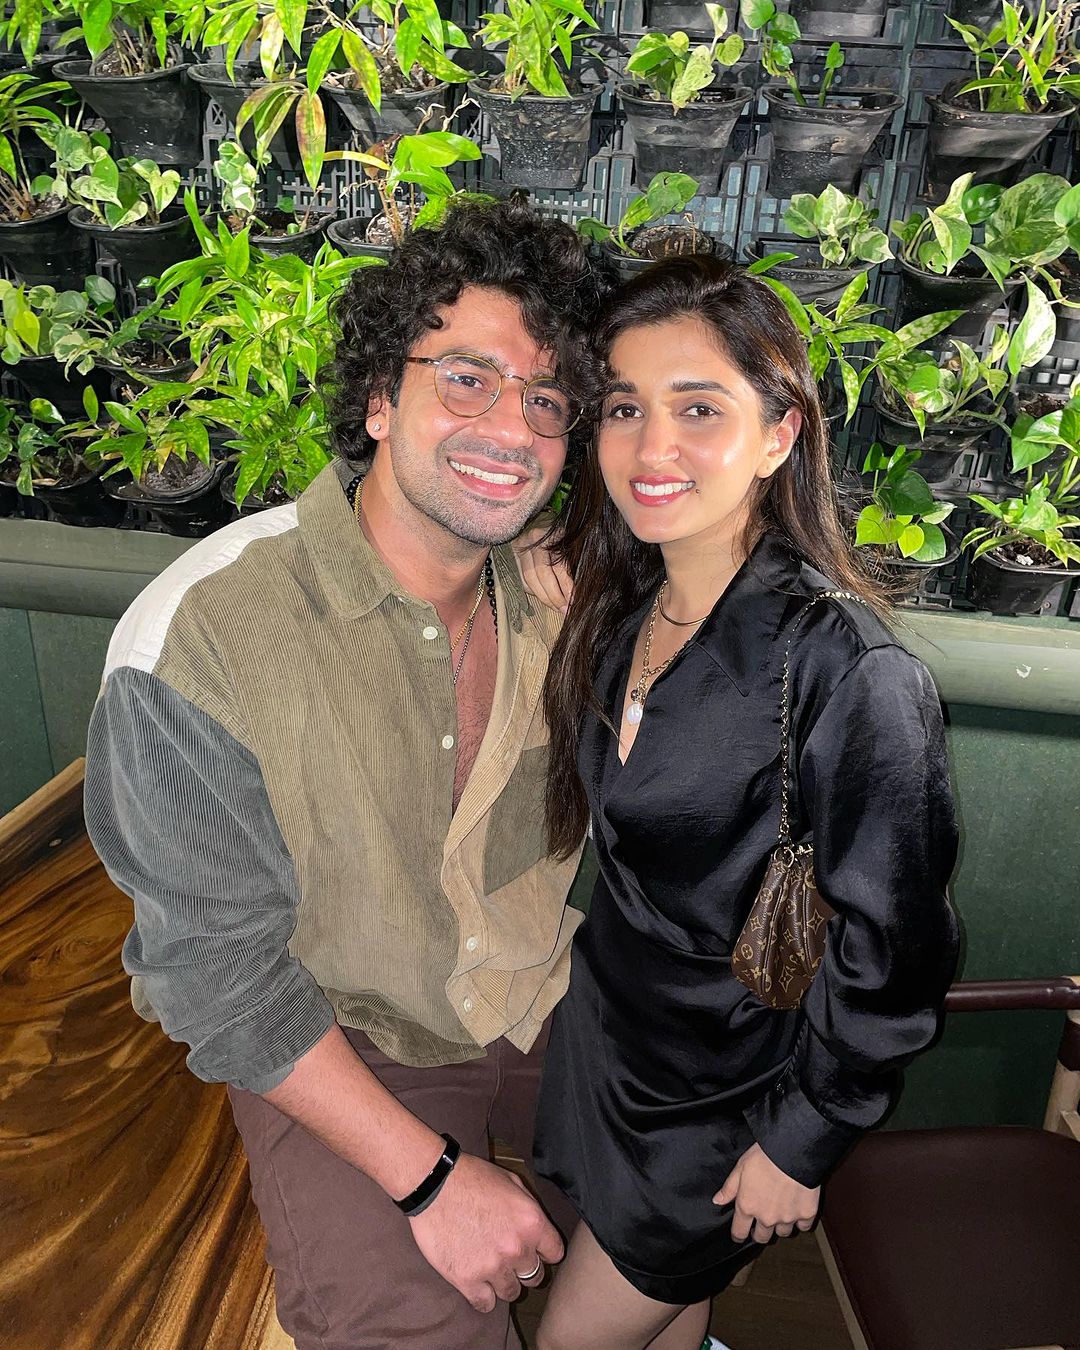 Aashish Mehrotra Wishes Speedy Recovery Of His Co-Star Nidhi Shah! Her Fans Also Showered Their Wishes And Prayed Wholeheartedly For Her Well-Being. 